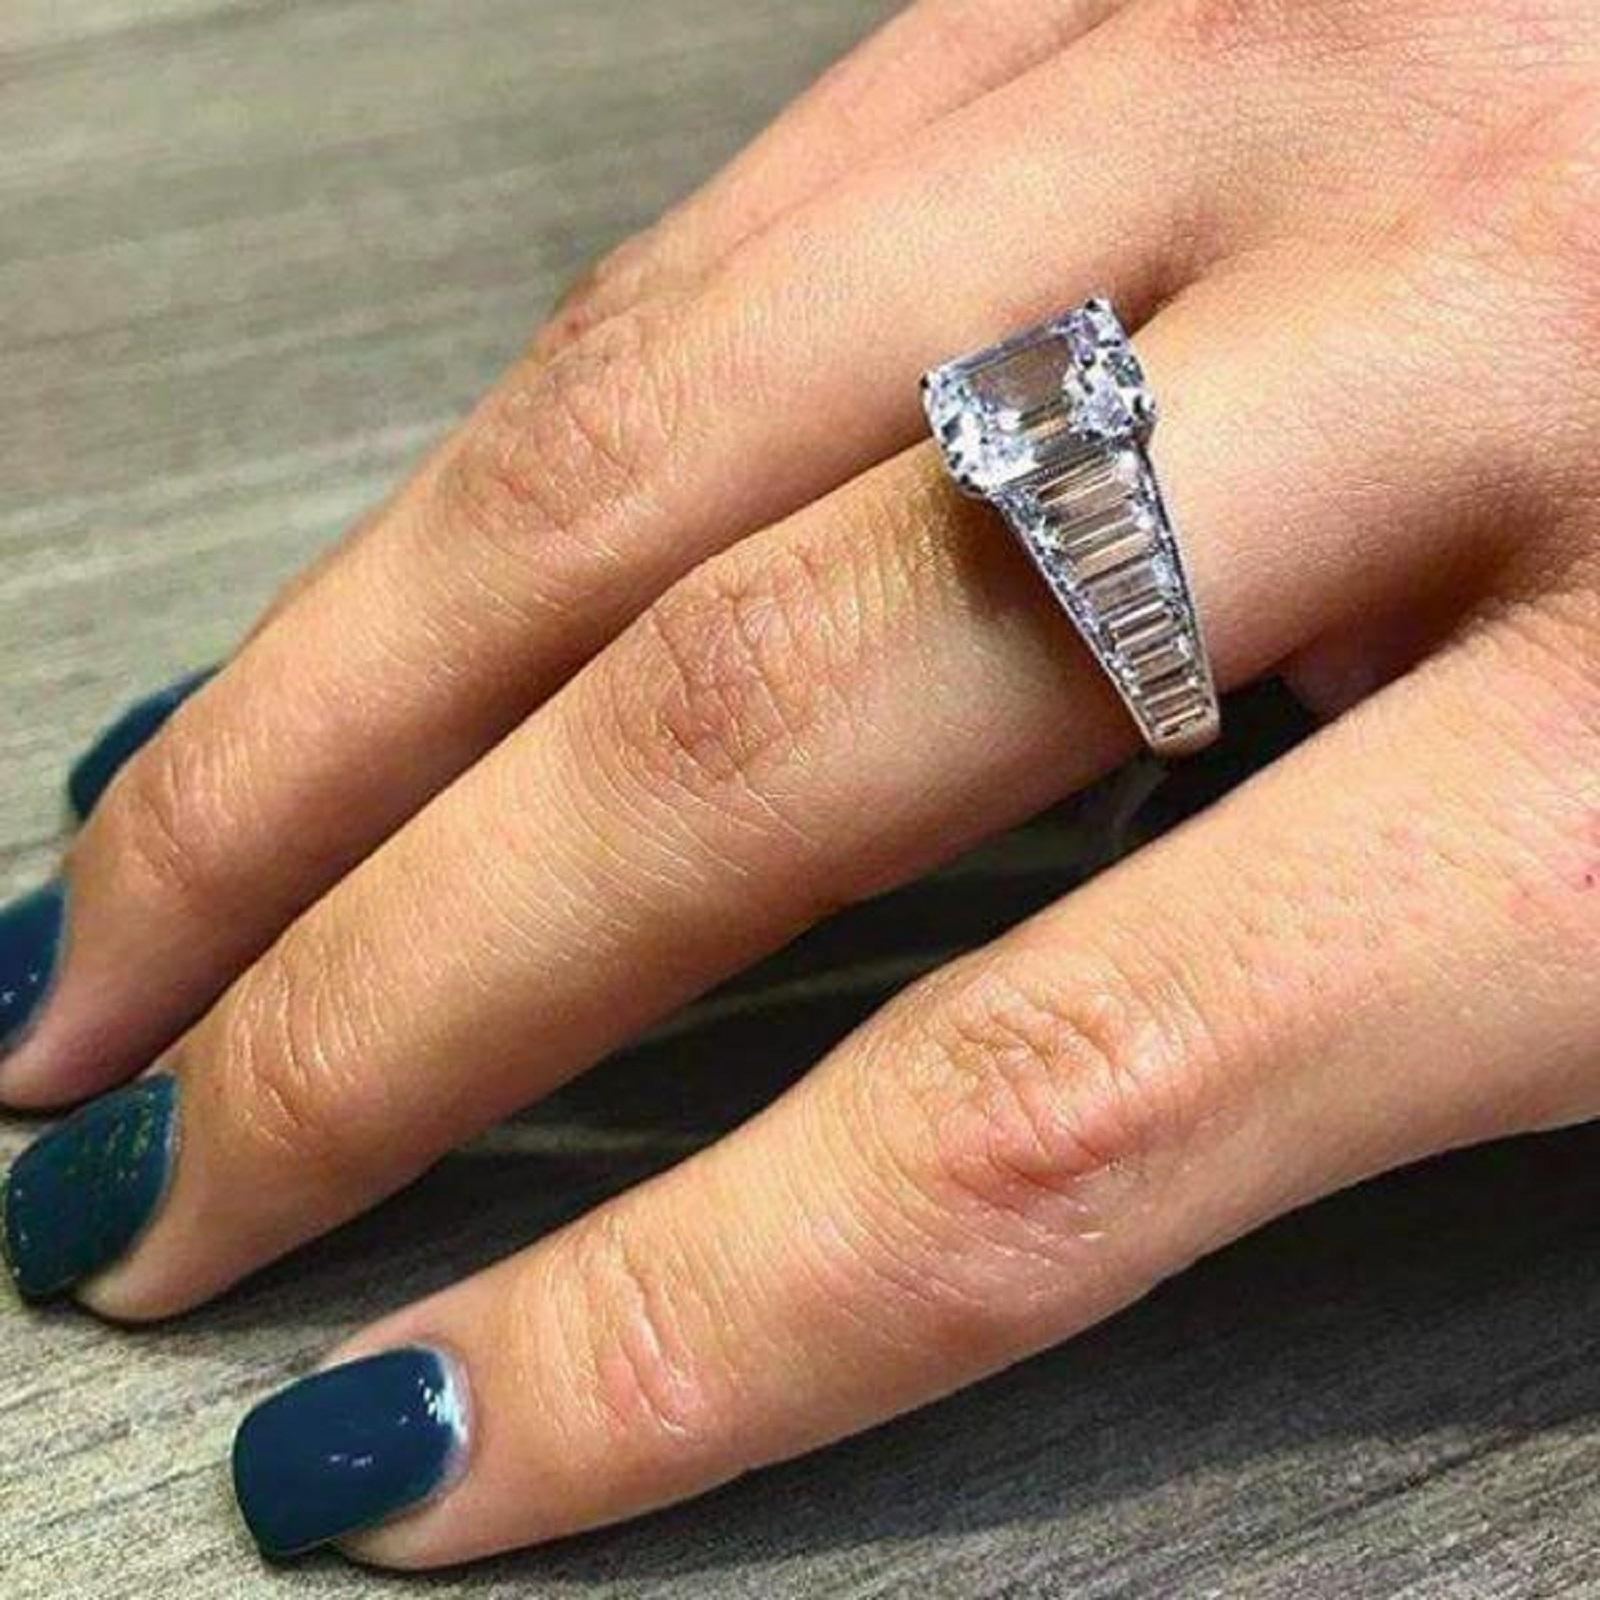 An exquisite emerald cut diamond ring with a beautiful handmade in Italy solid platinum mounting that is composed by emerald cut diamonds at each side all very clear and full of brilliance.

The main stone is totally white faced consider GIA has